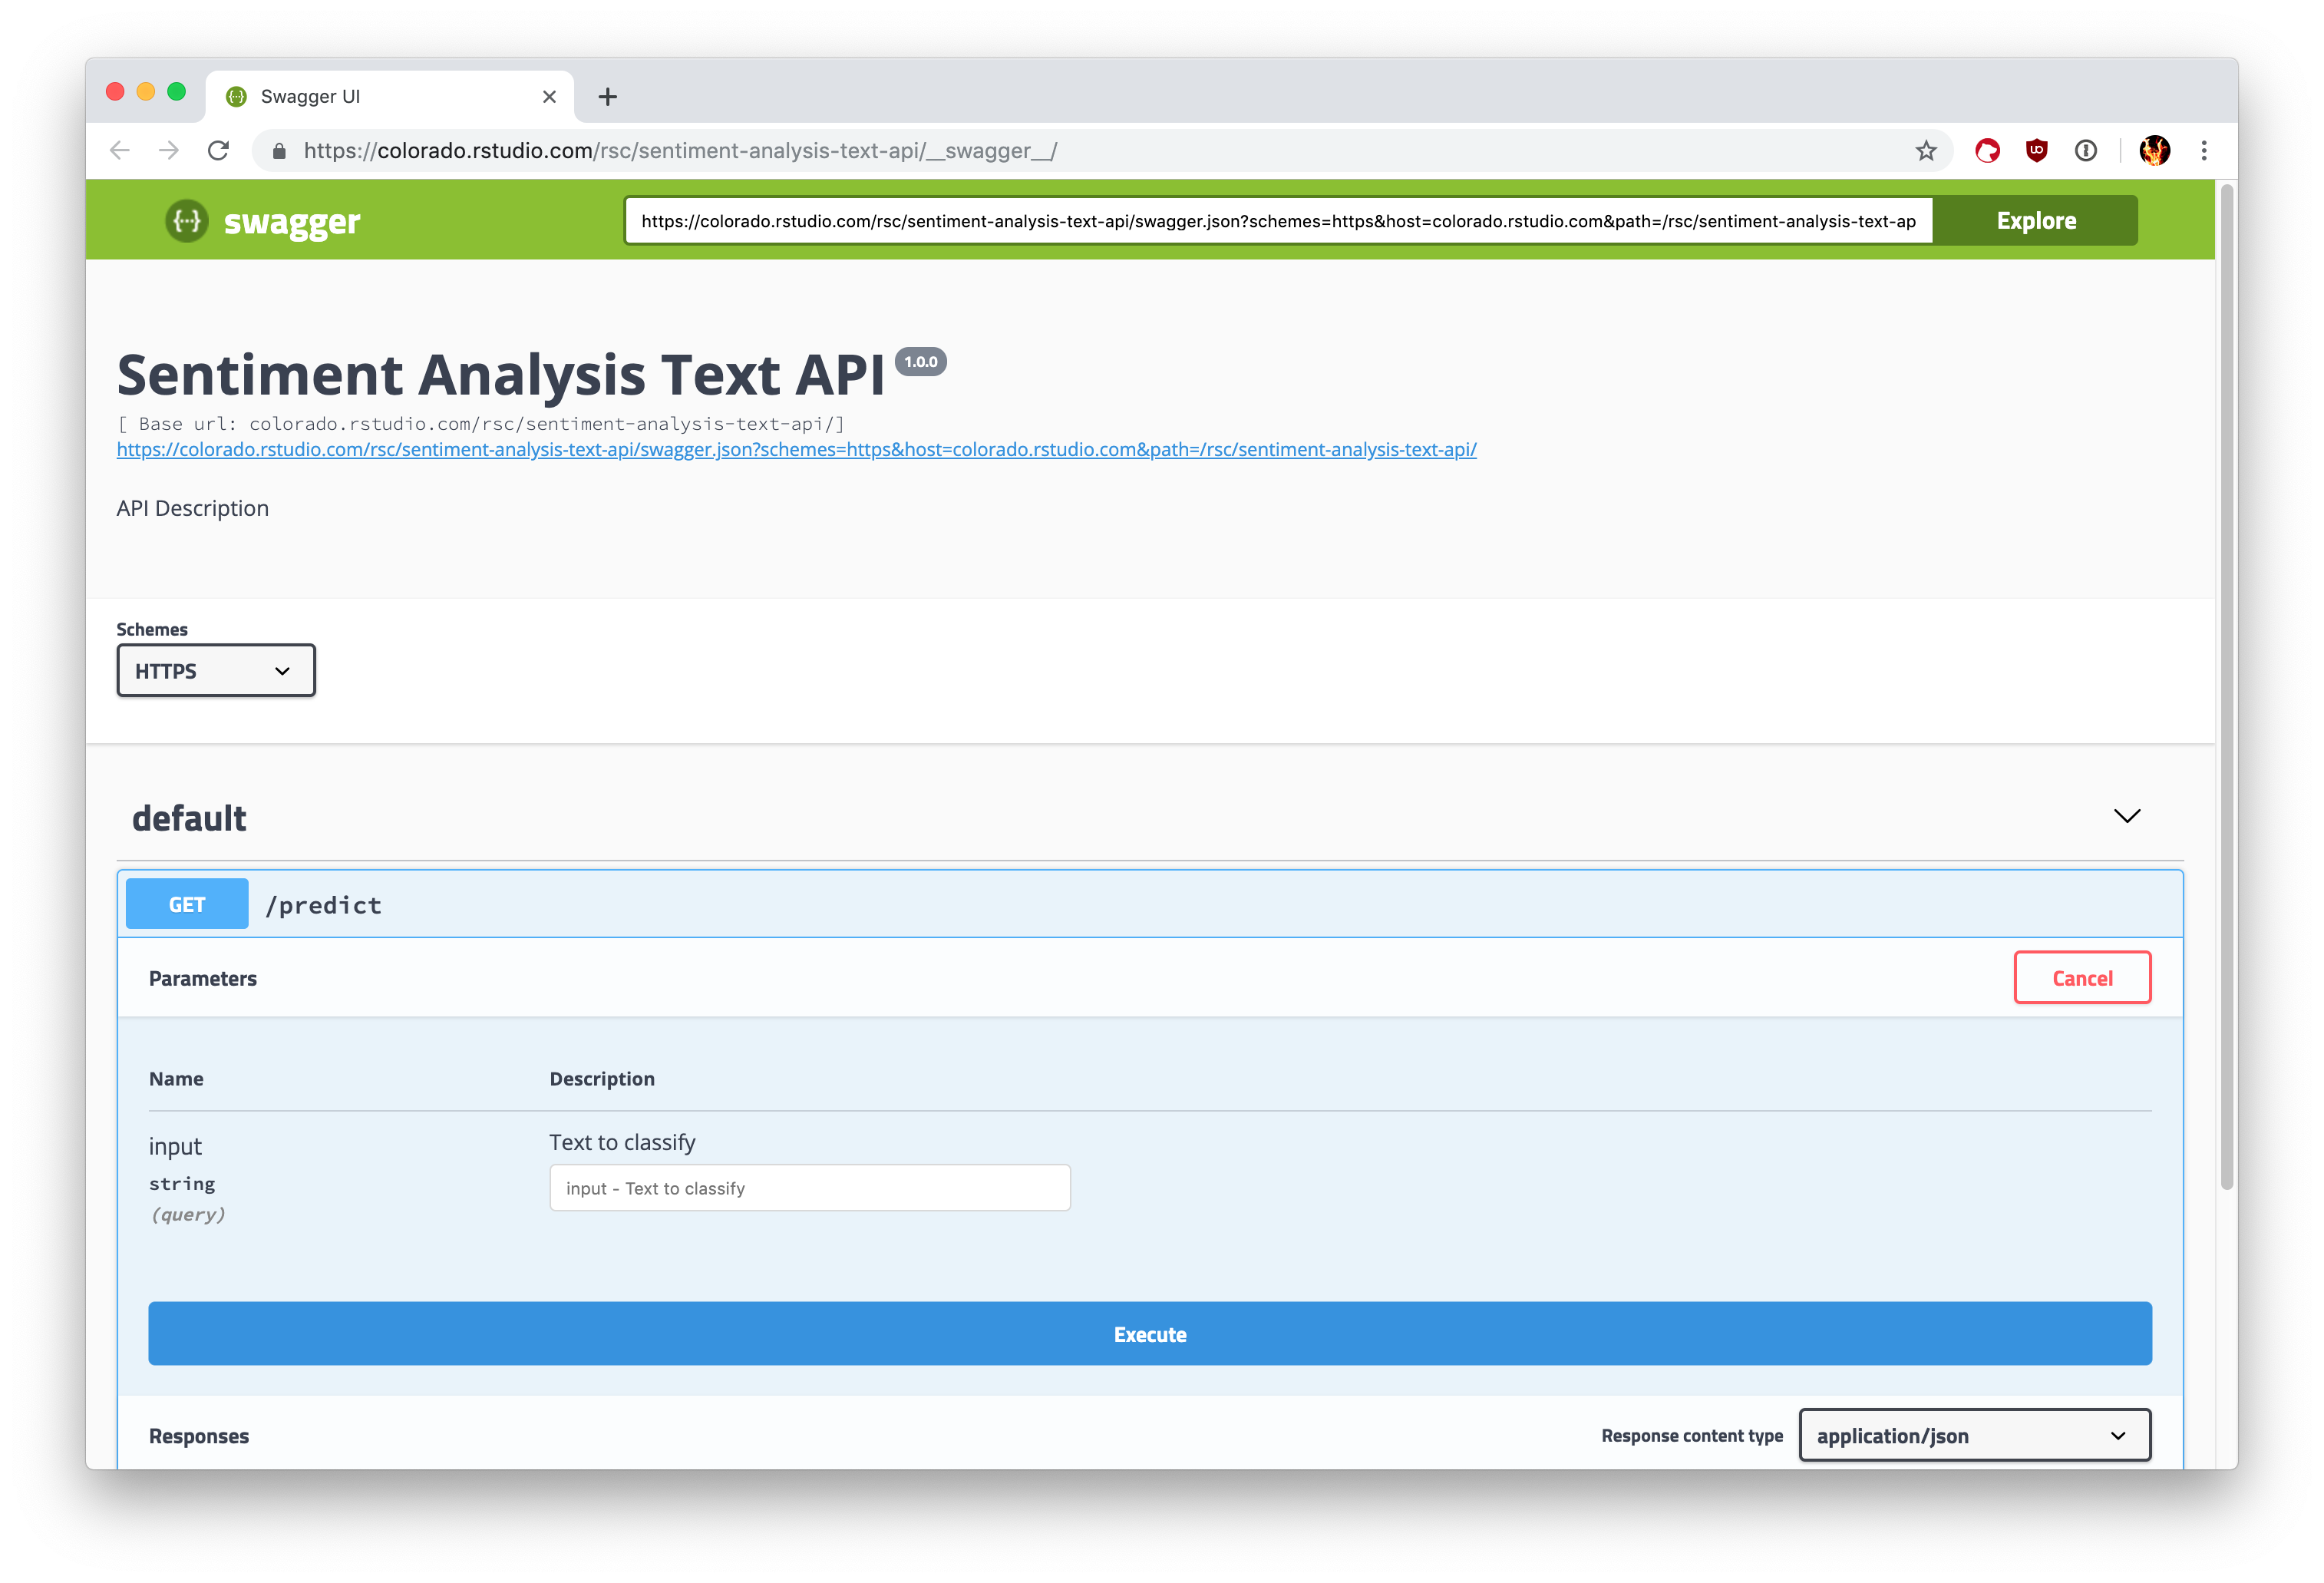 Screenshot of API deployed to Connect